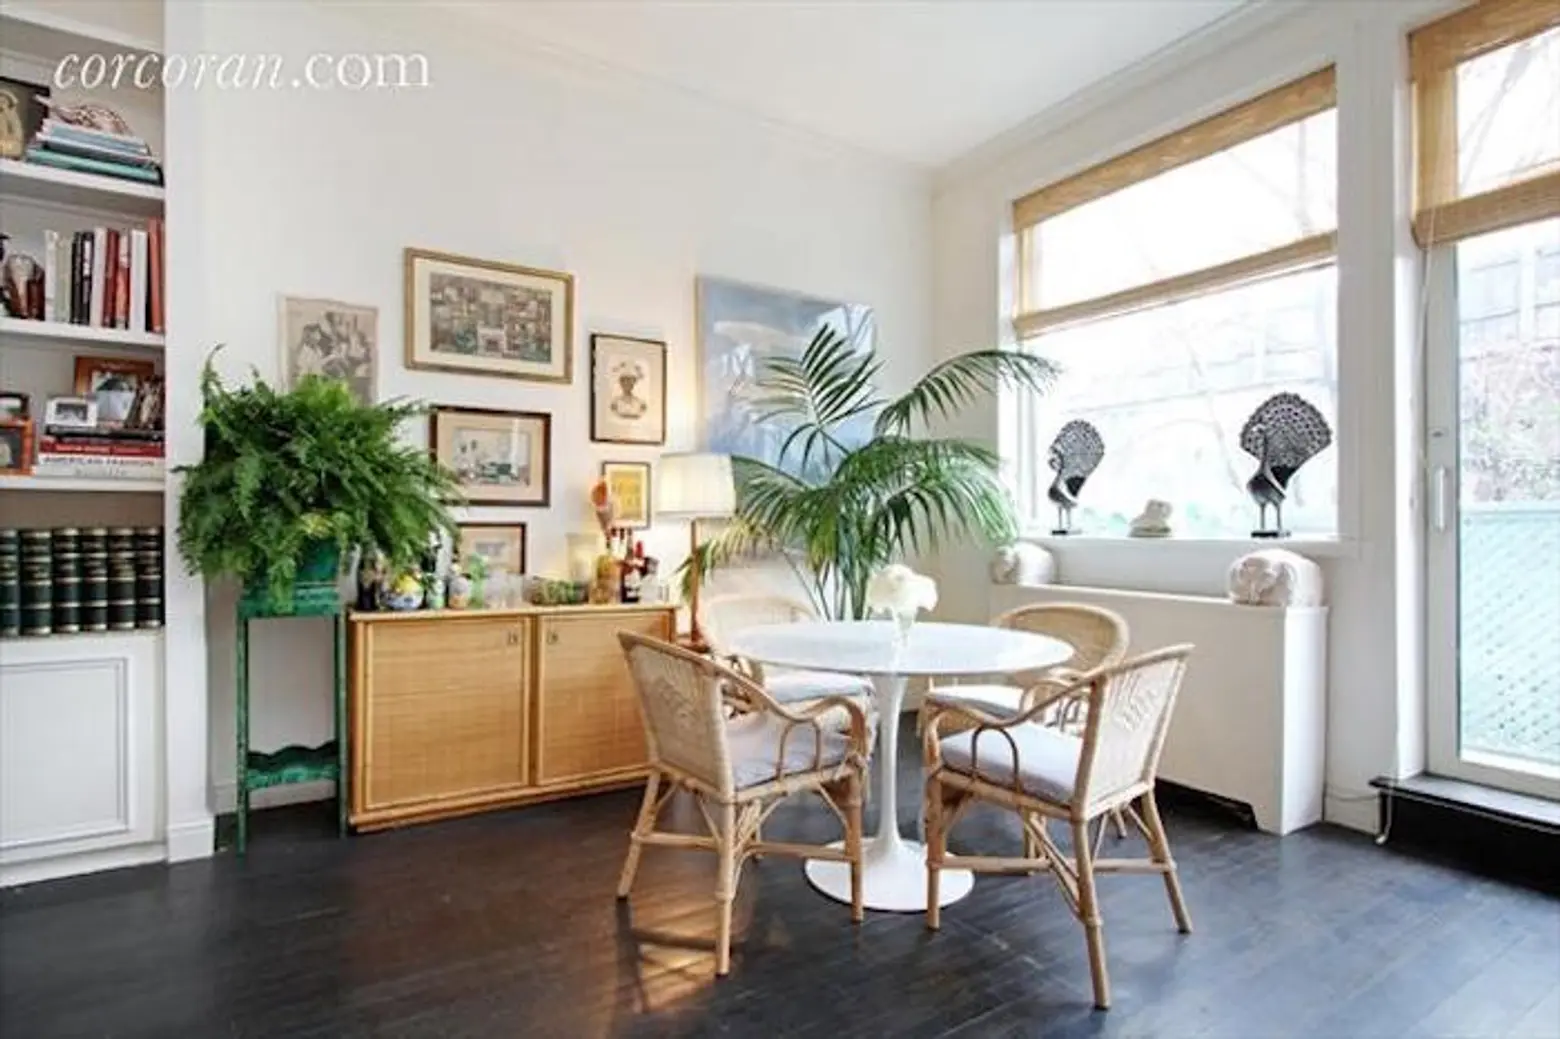 77 Horatio Street, West Village, Cool Listing, Apartment for sale,